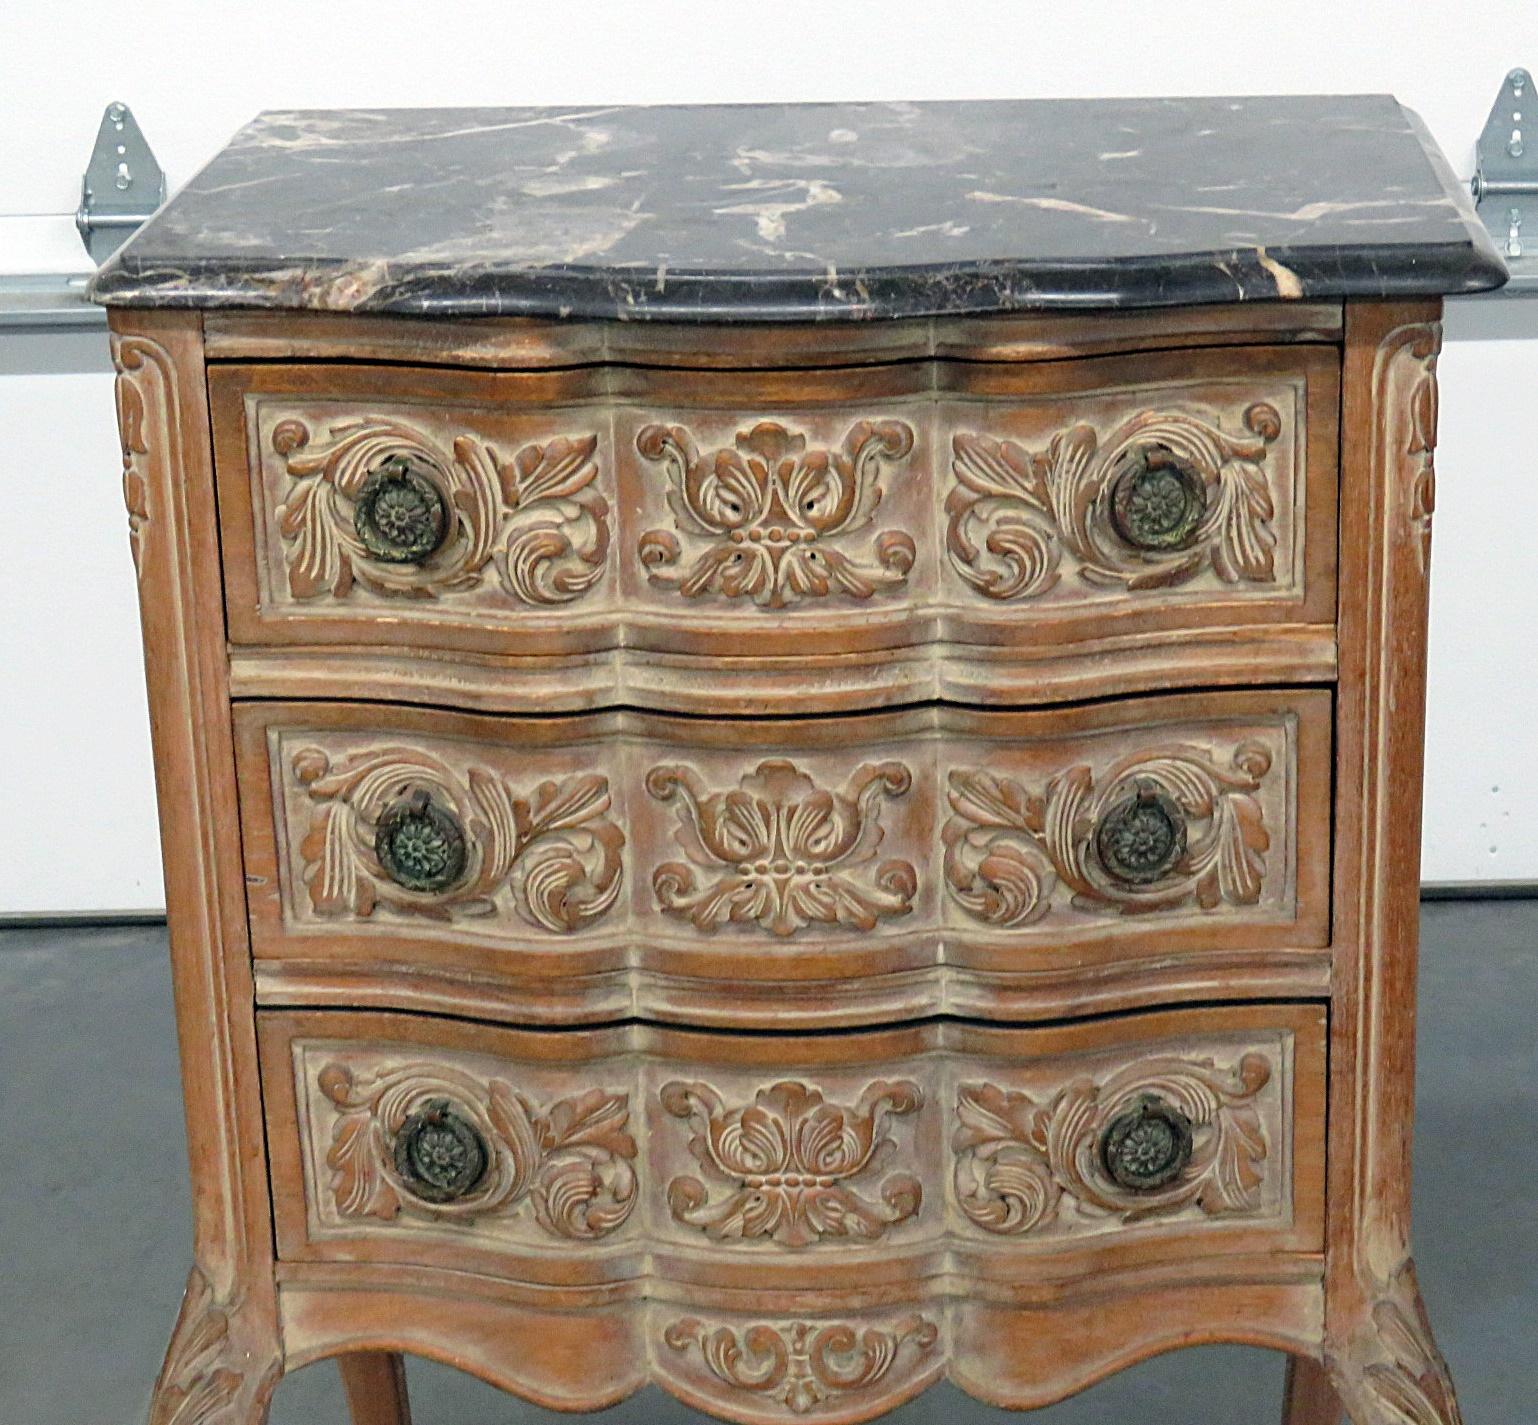 Antique Louis XVI style distressed painted marble top 3-drawer chest.